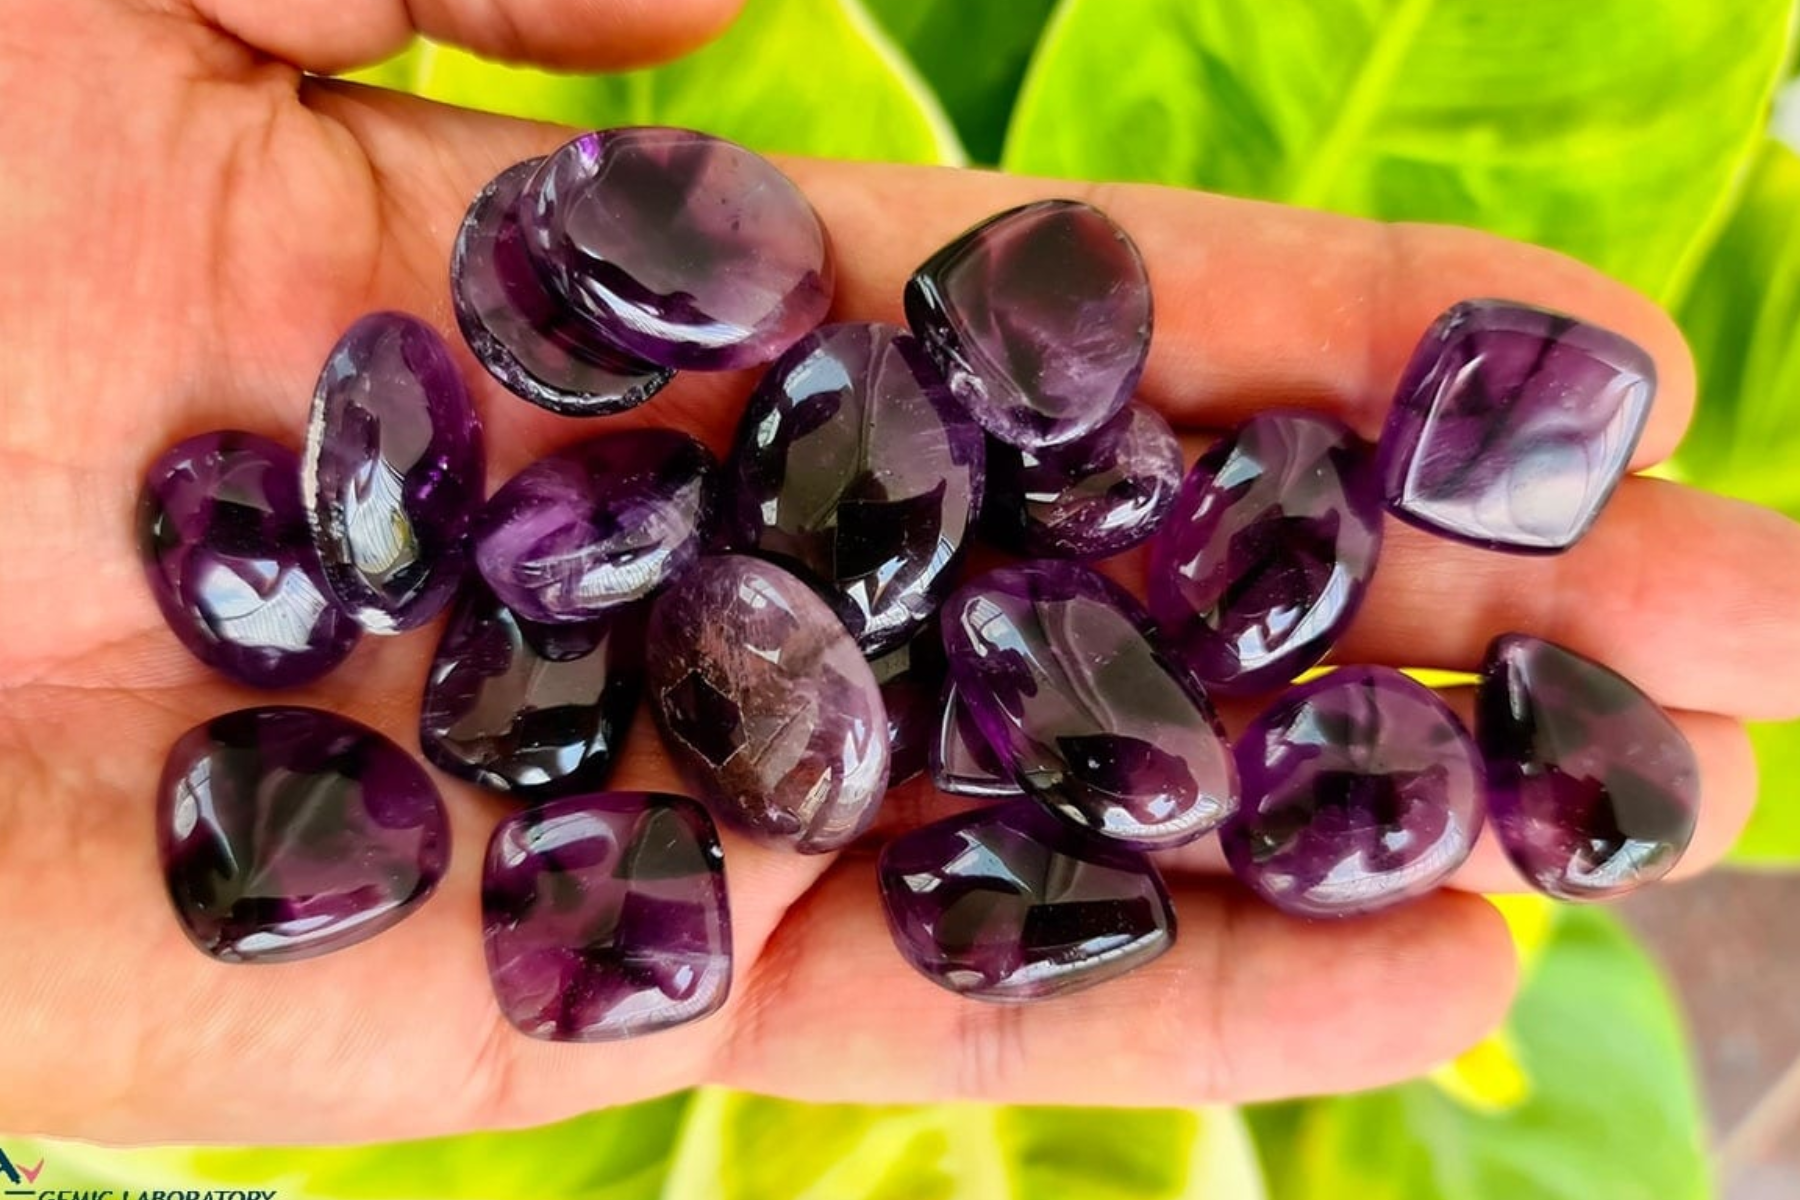 A photograph of a single hand with 19 small, violet stones resting on the palm